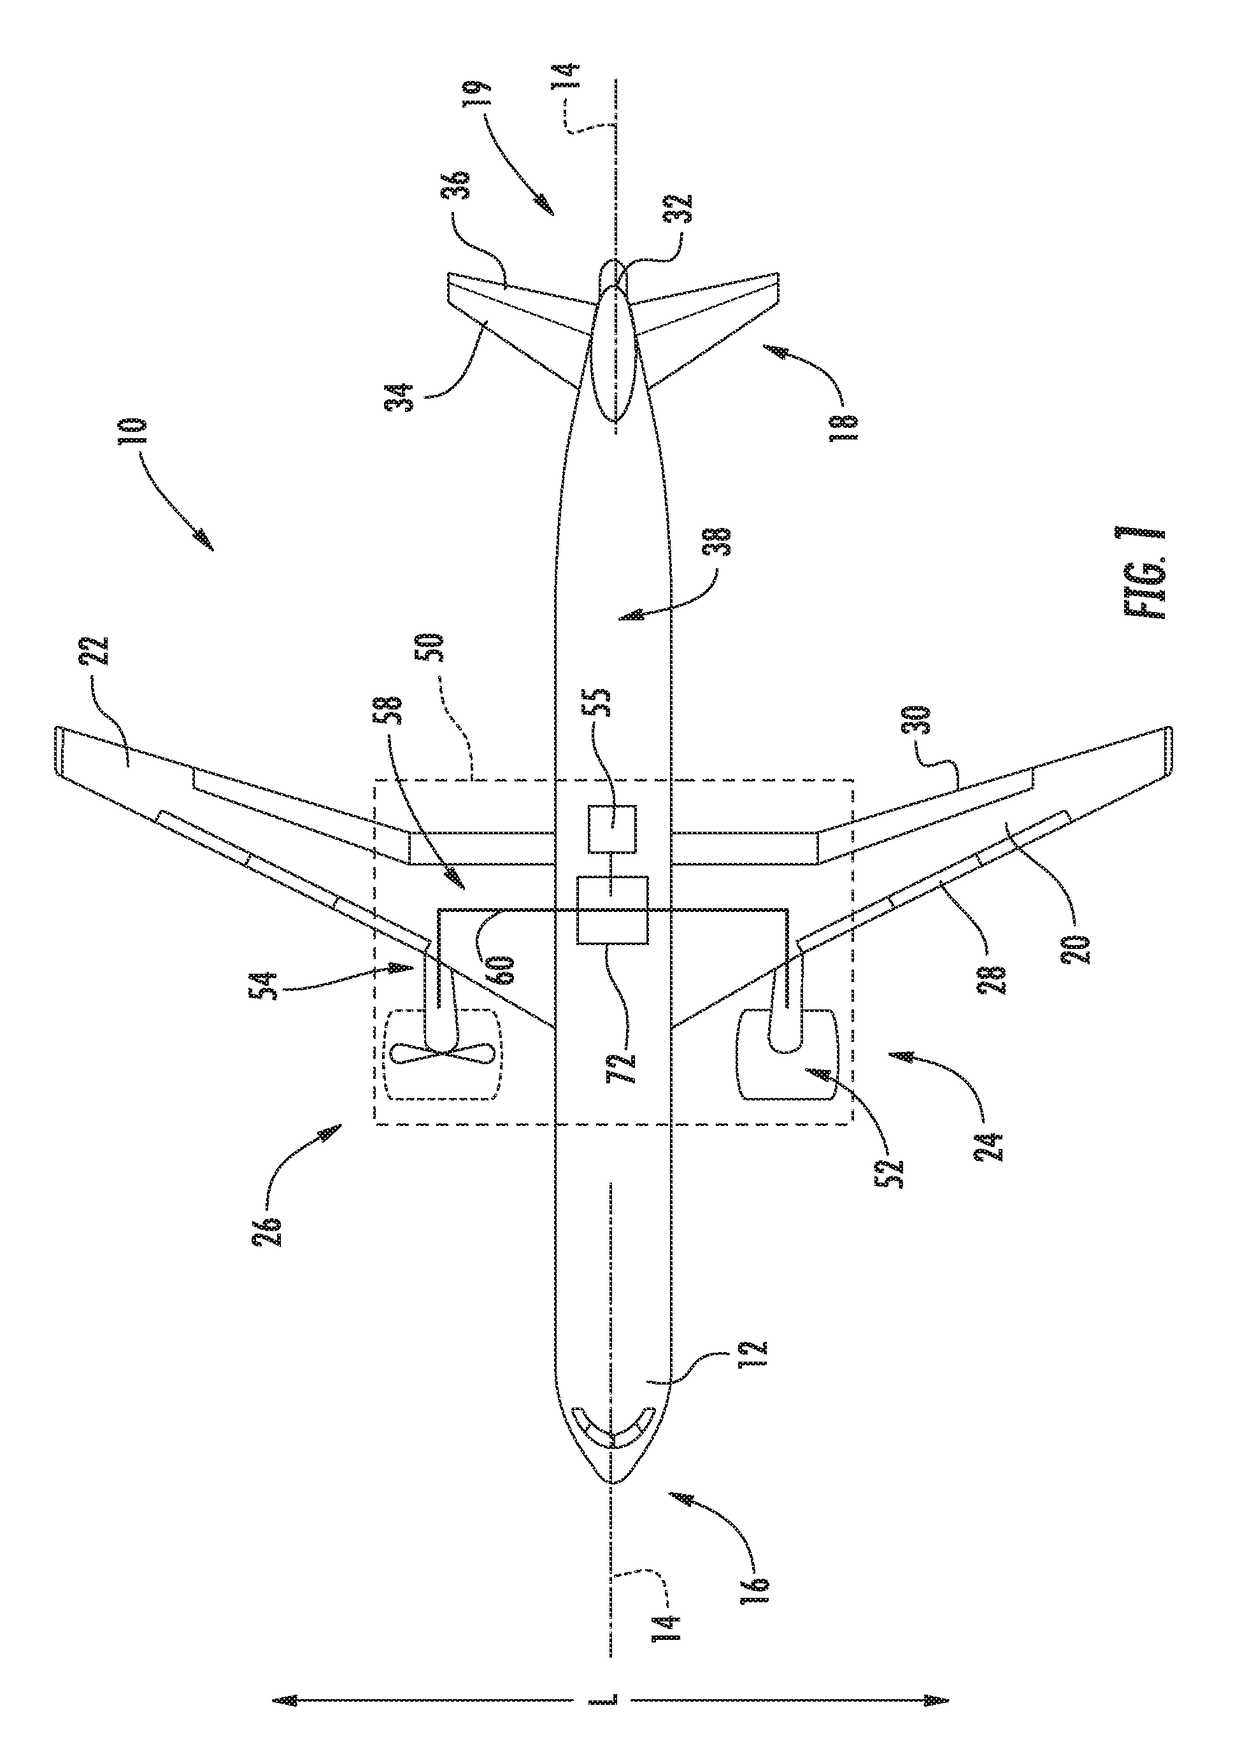 Hybrid-electric propulsion system for an aircraft